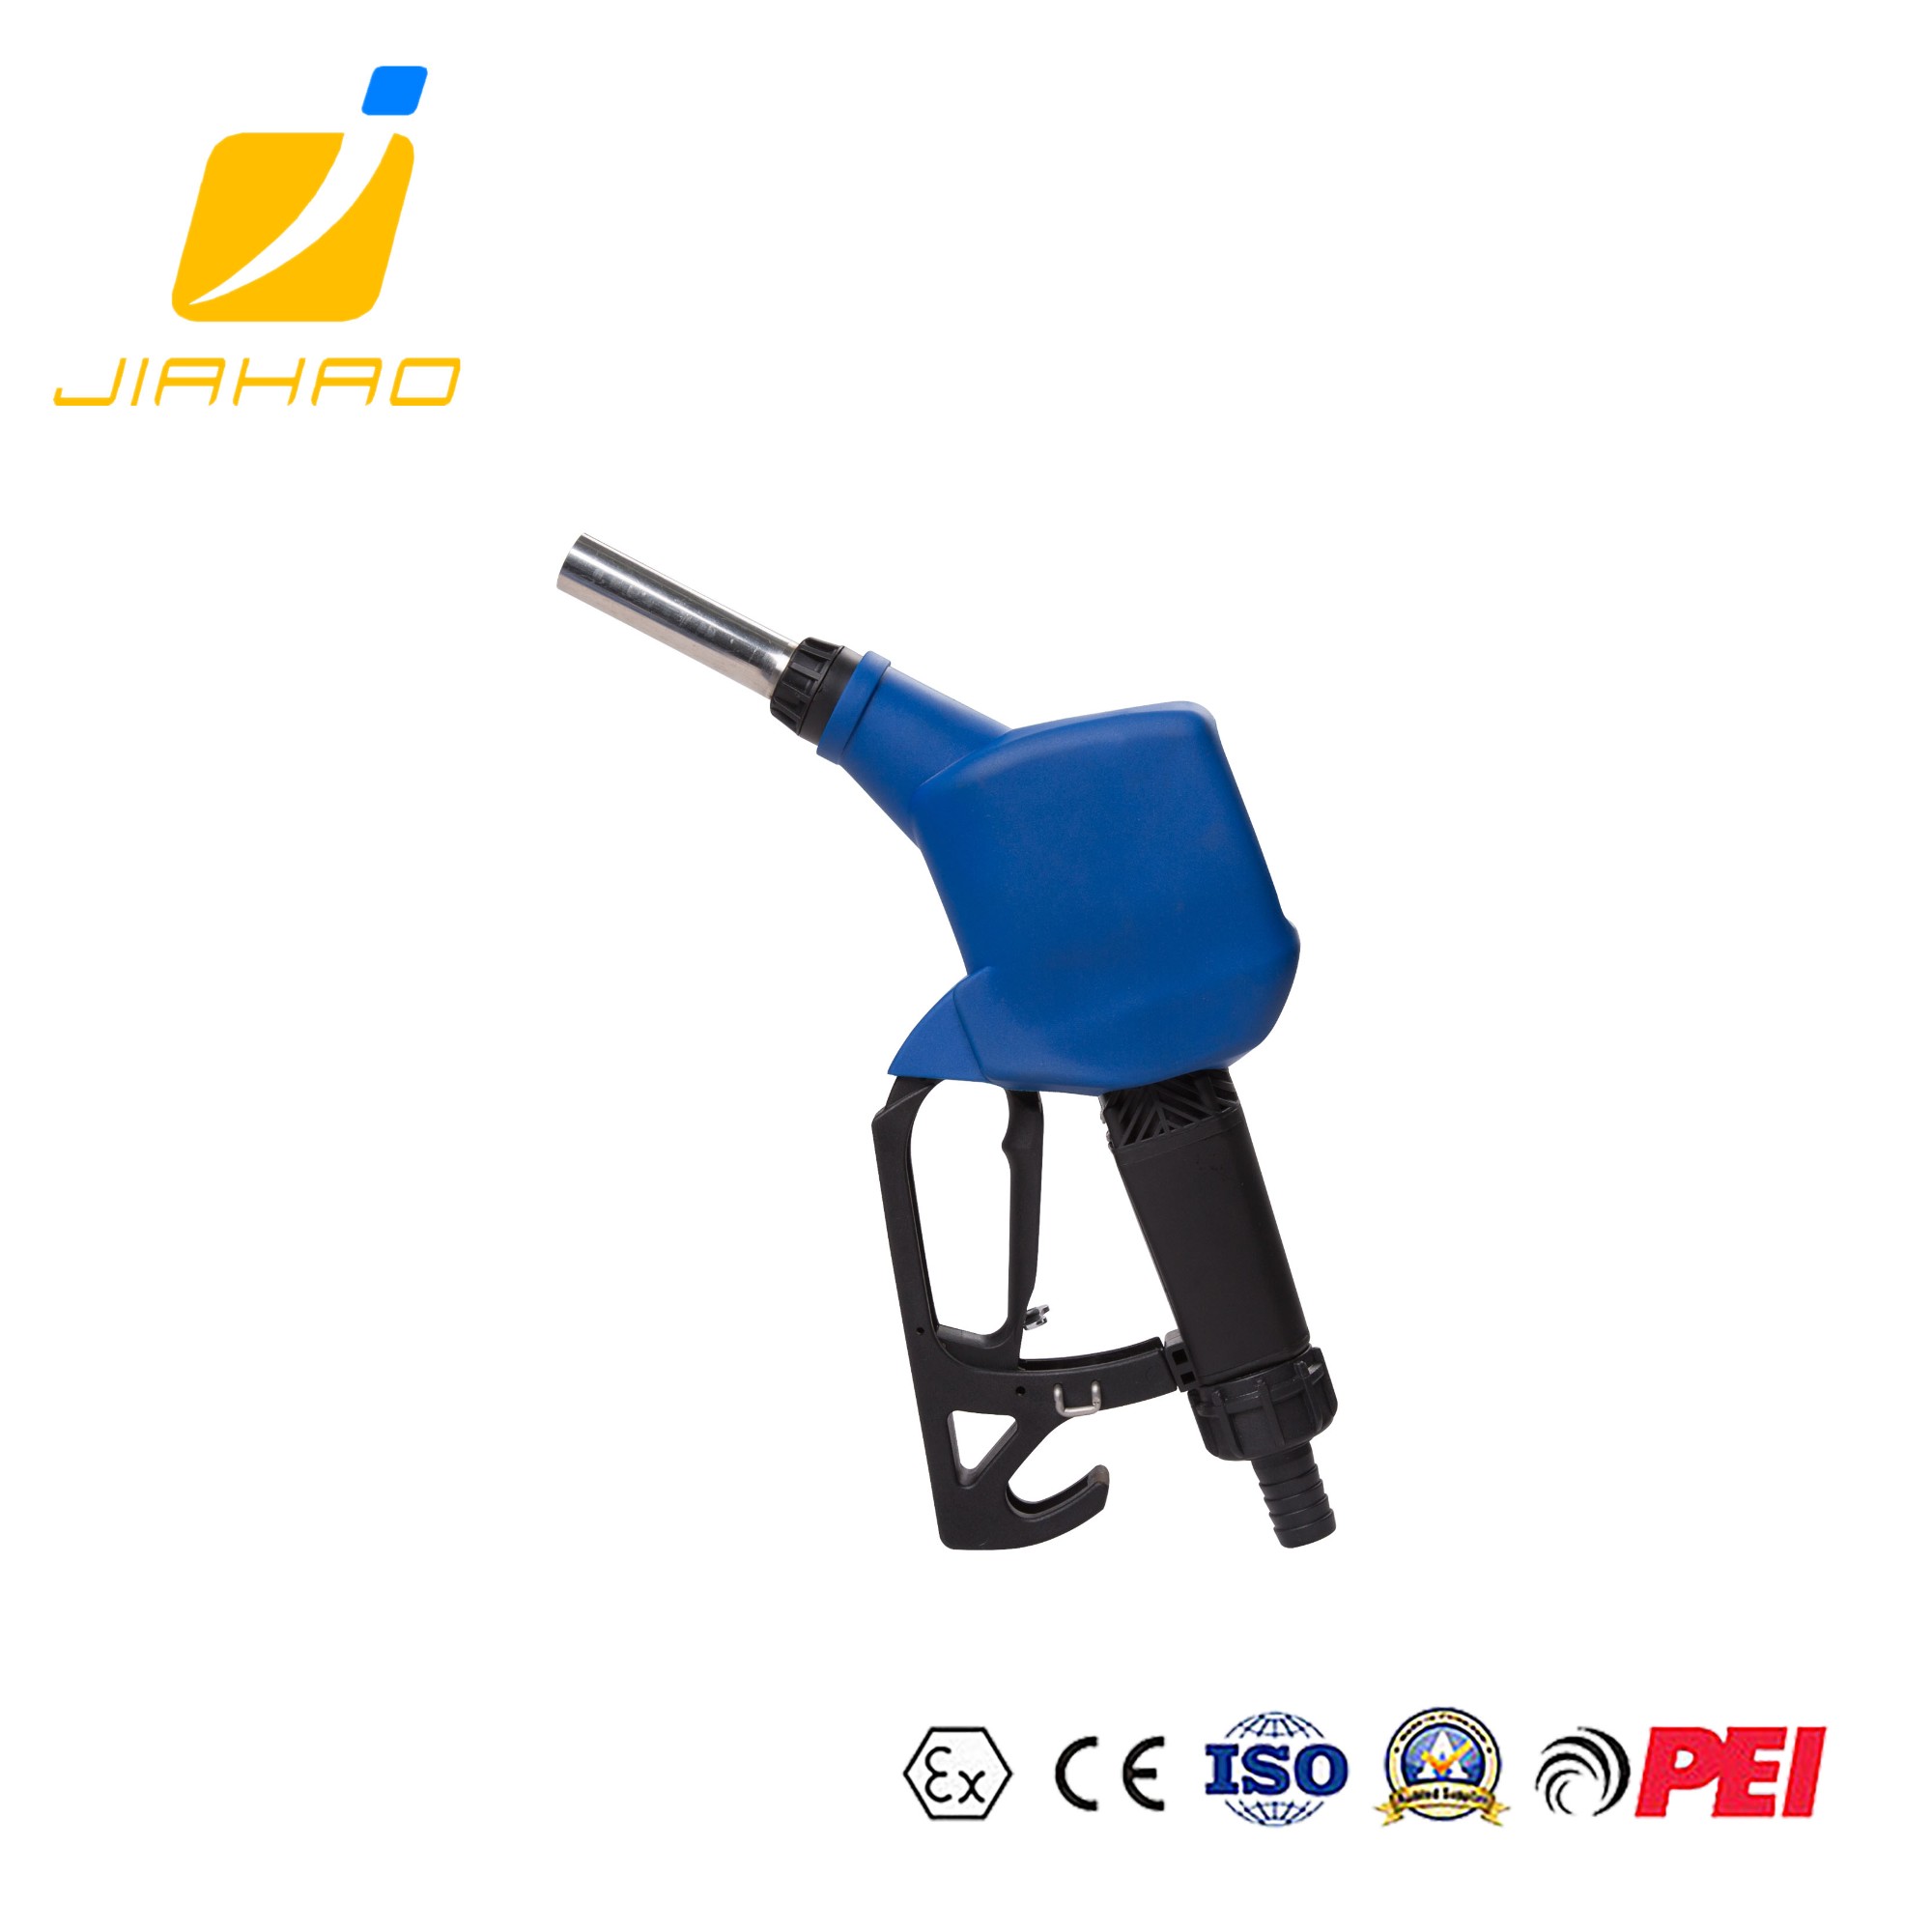 JH-AUSQ-30 ADBLUE DISPENSERING  NOZLE WITHOUT FLOW  METER